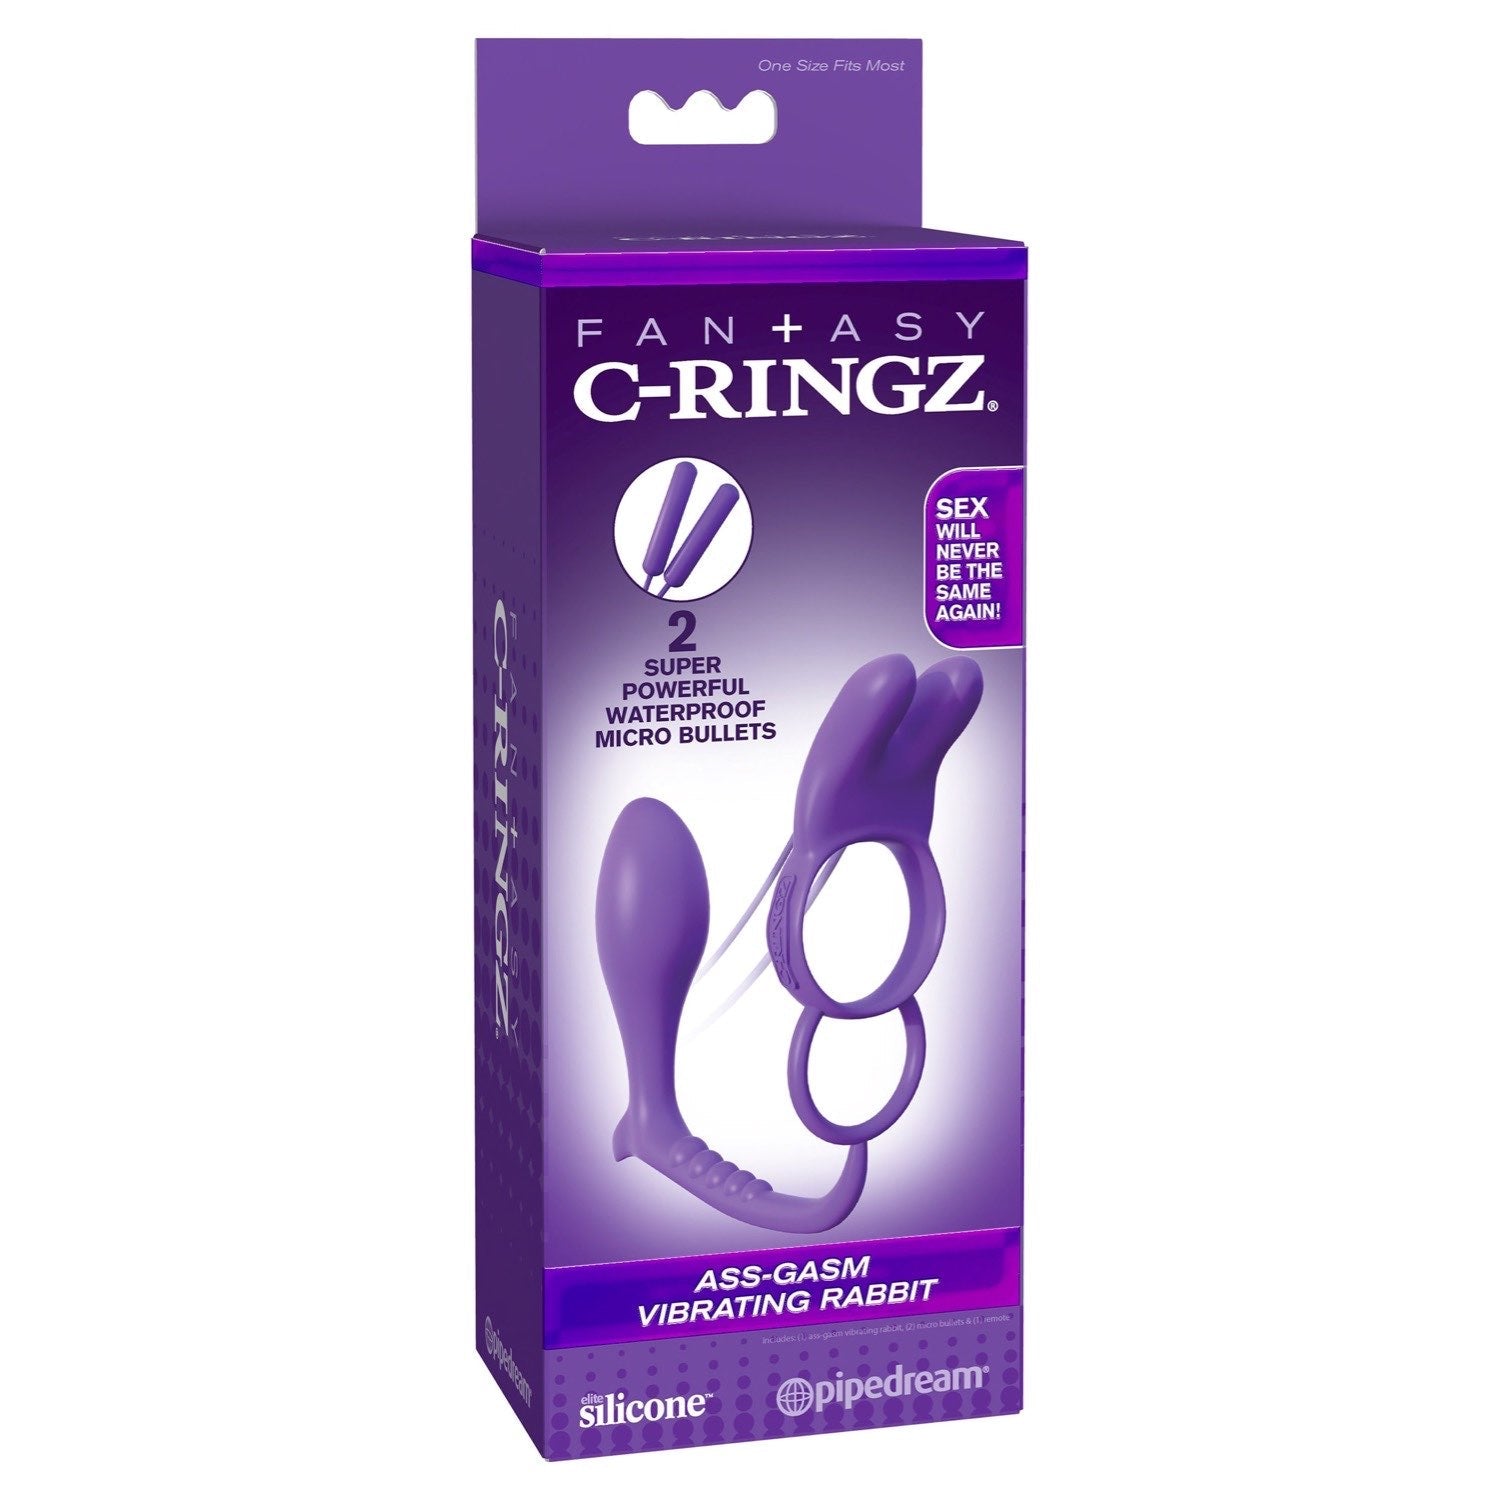 Fantasy C-Ringz Fantasy C-ringz Ass-gasm Vibrating Rabbit - Purple Vibrating Cock Ring with Anal Plug by Pipedream